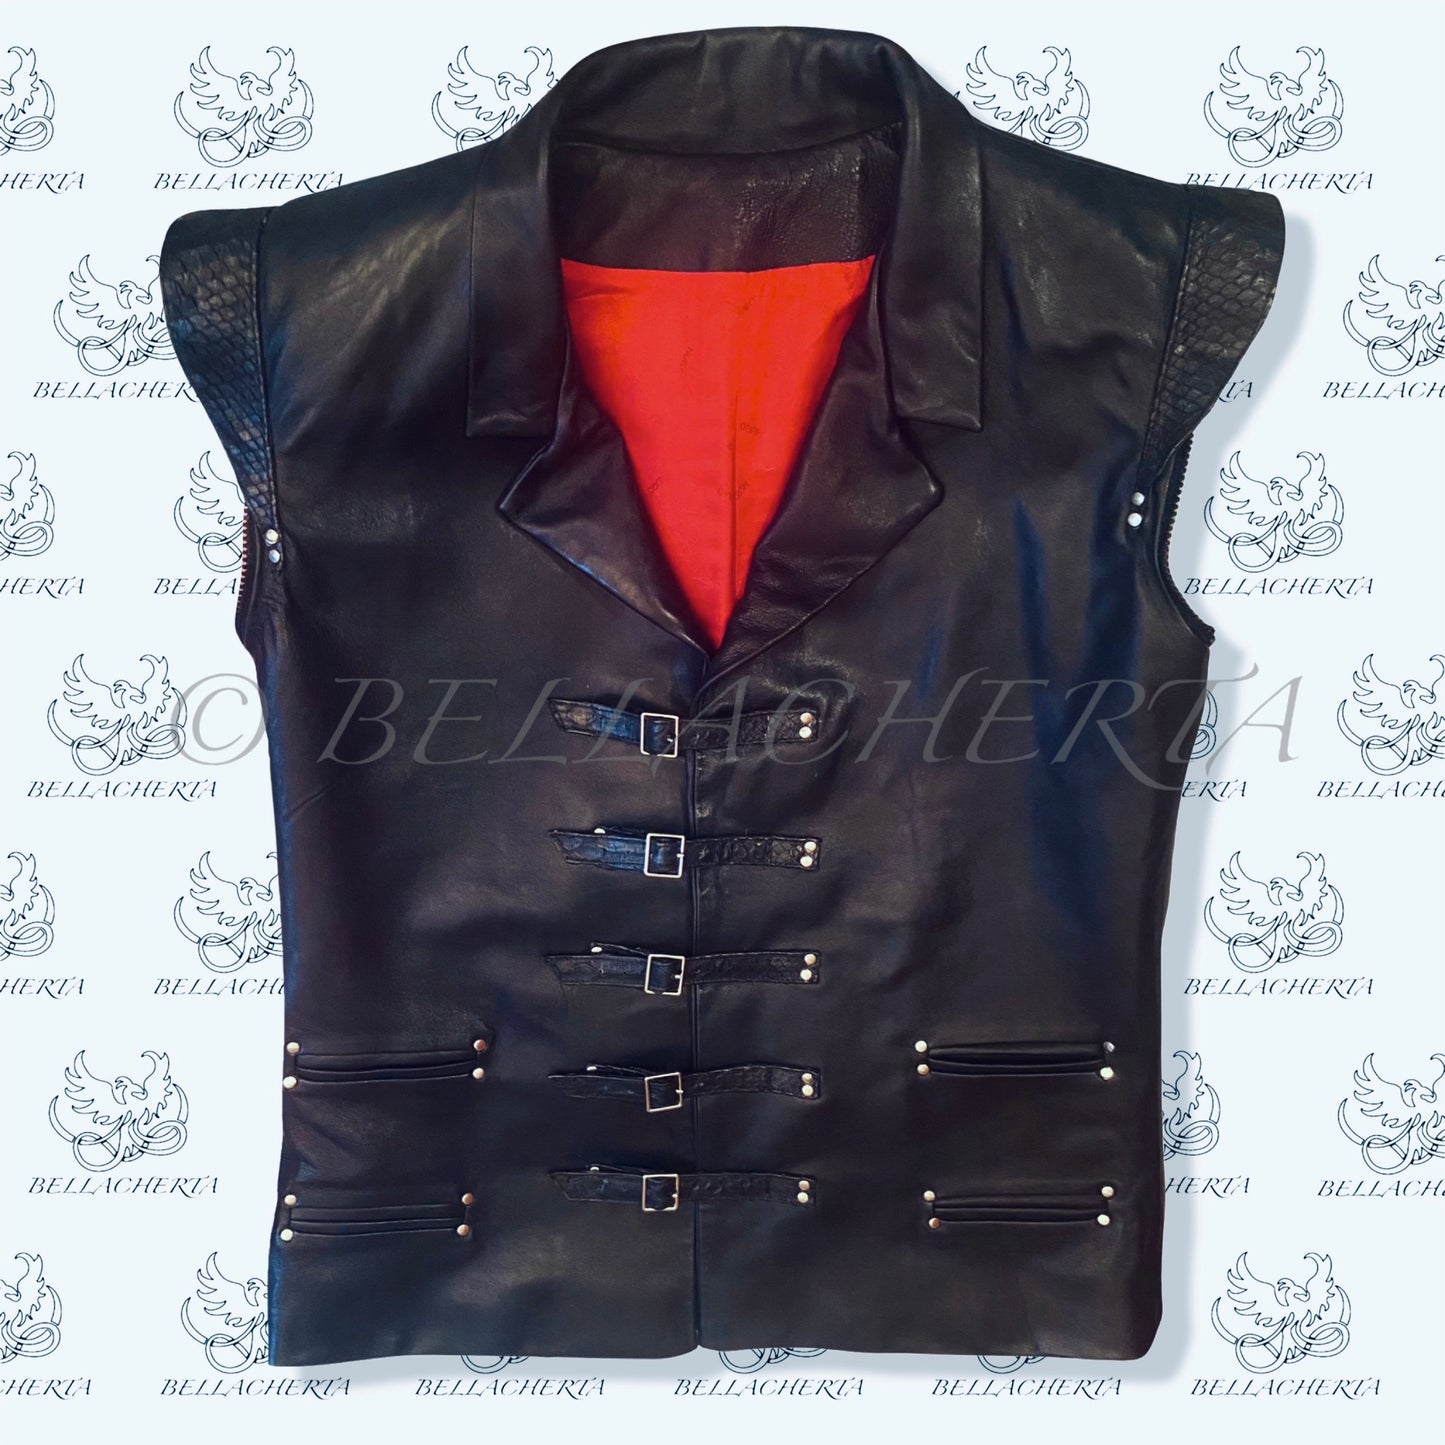 Sheepskin Vest-to-Jacket with Snakeskin Decorative Details and Detachable Sleeves